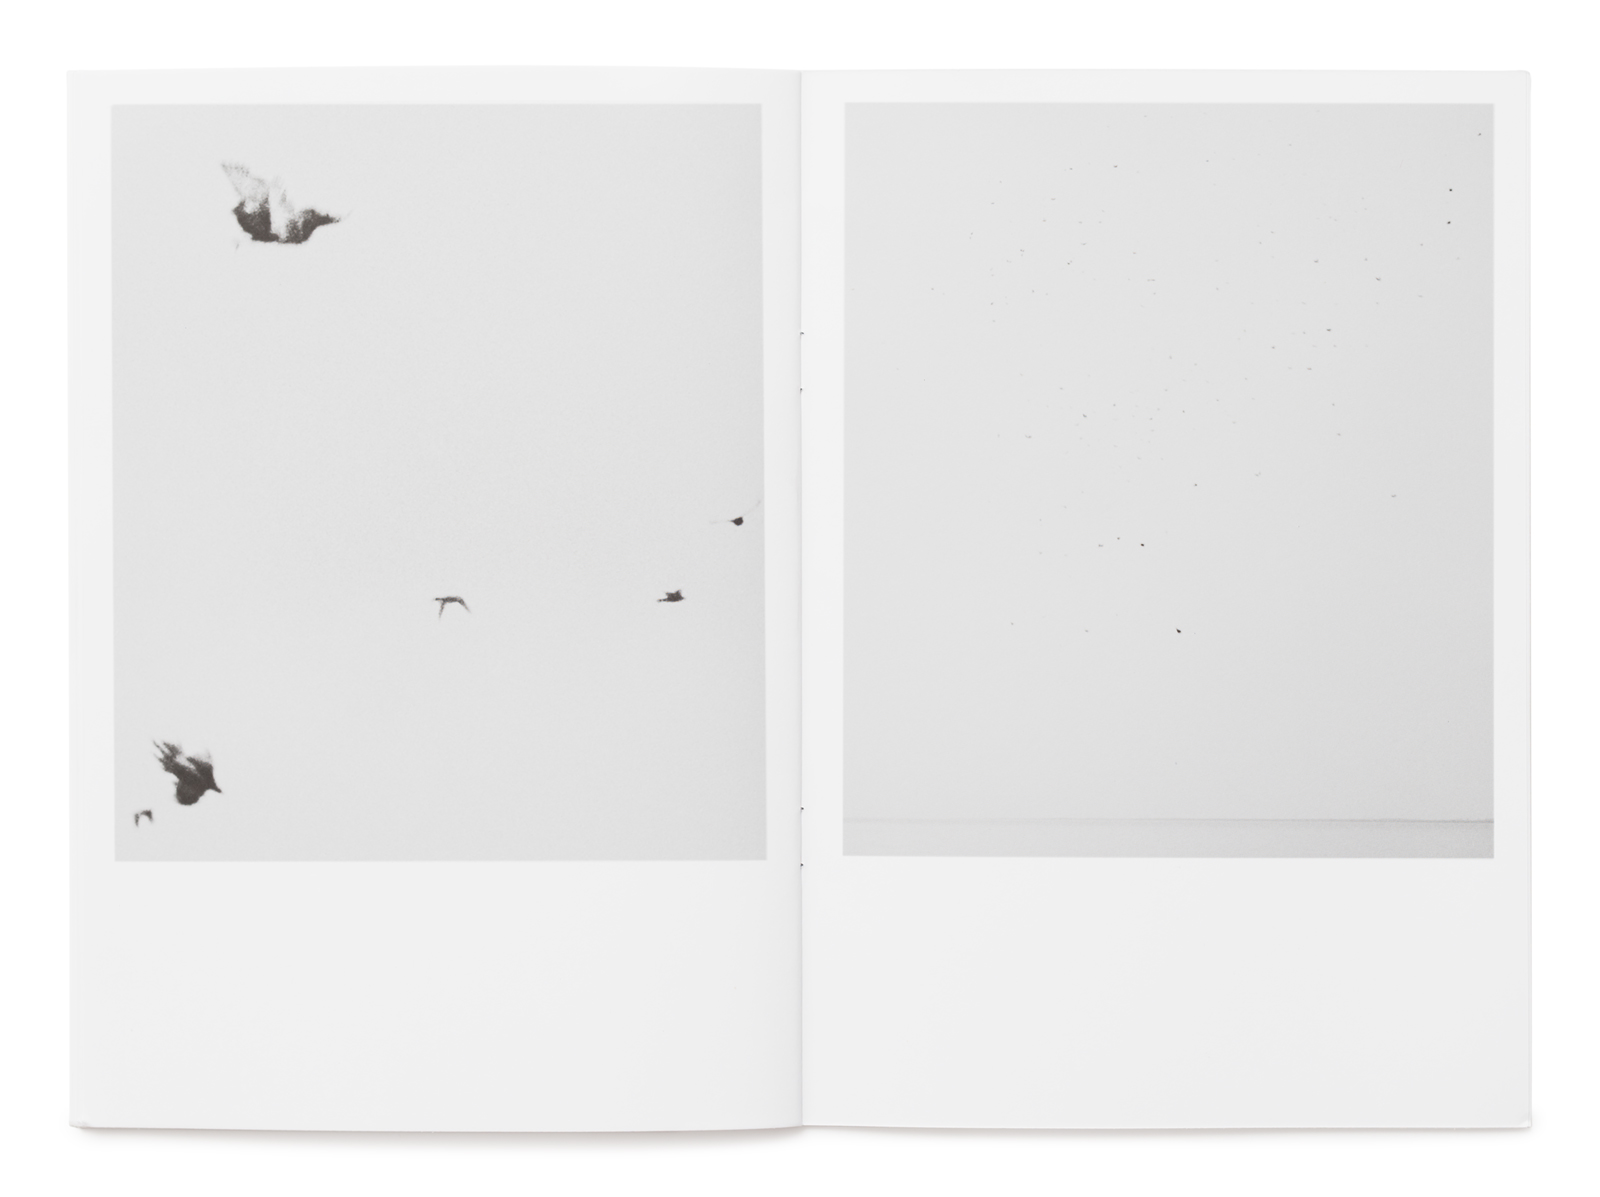 Spread from the book Dying birds by Trine Søndergaard and Nicolai Howalt